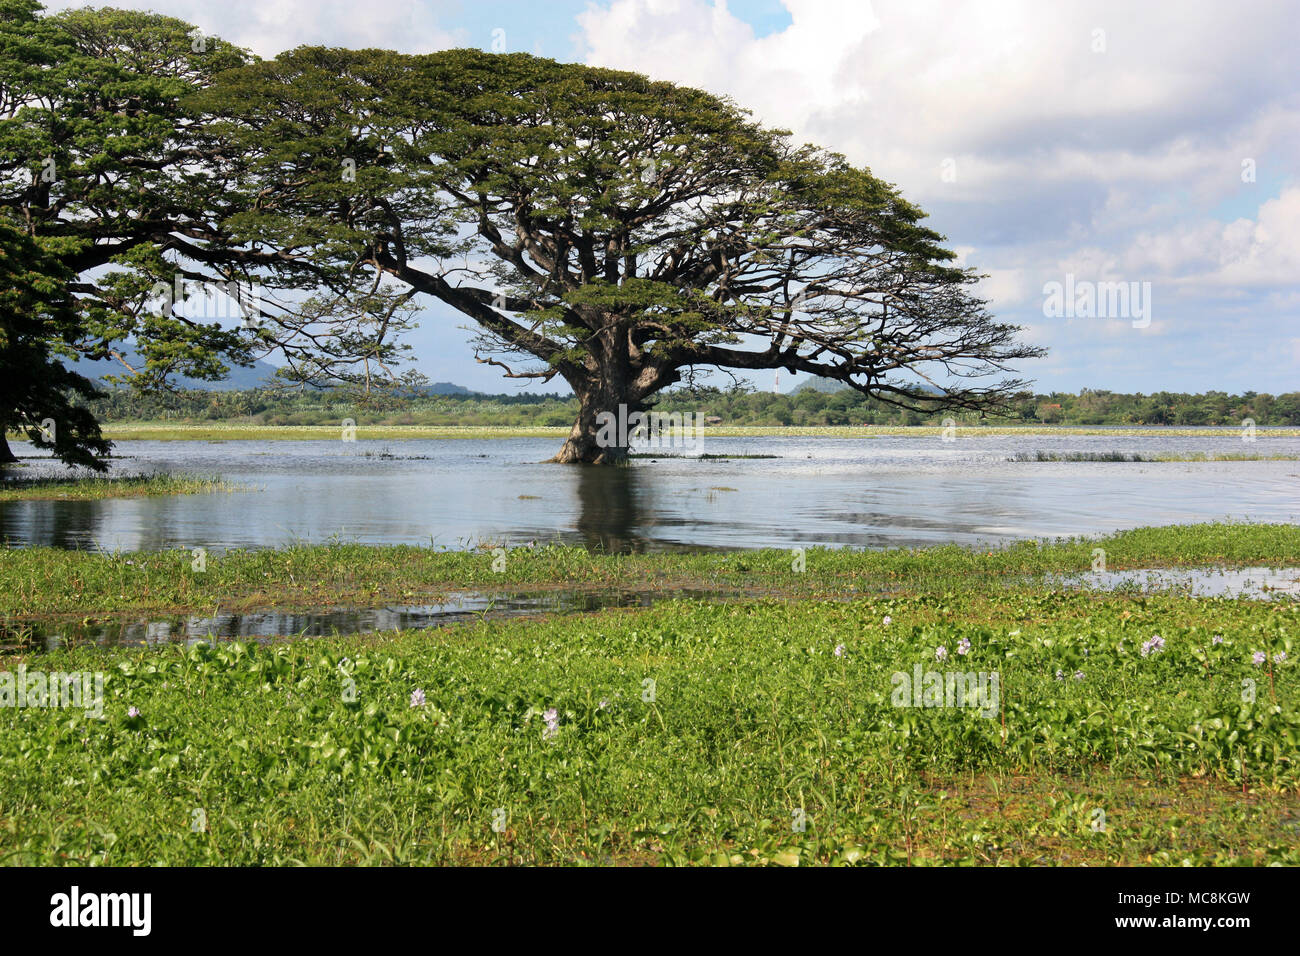 Giant Trees and Water Hyacinth in Sri Lanka Stock Photo